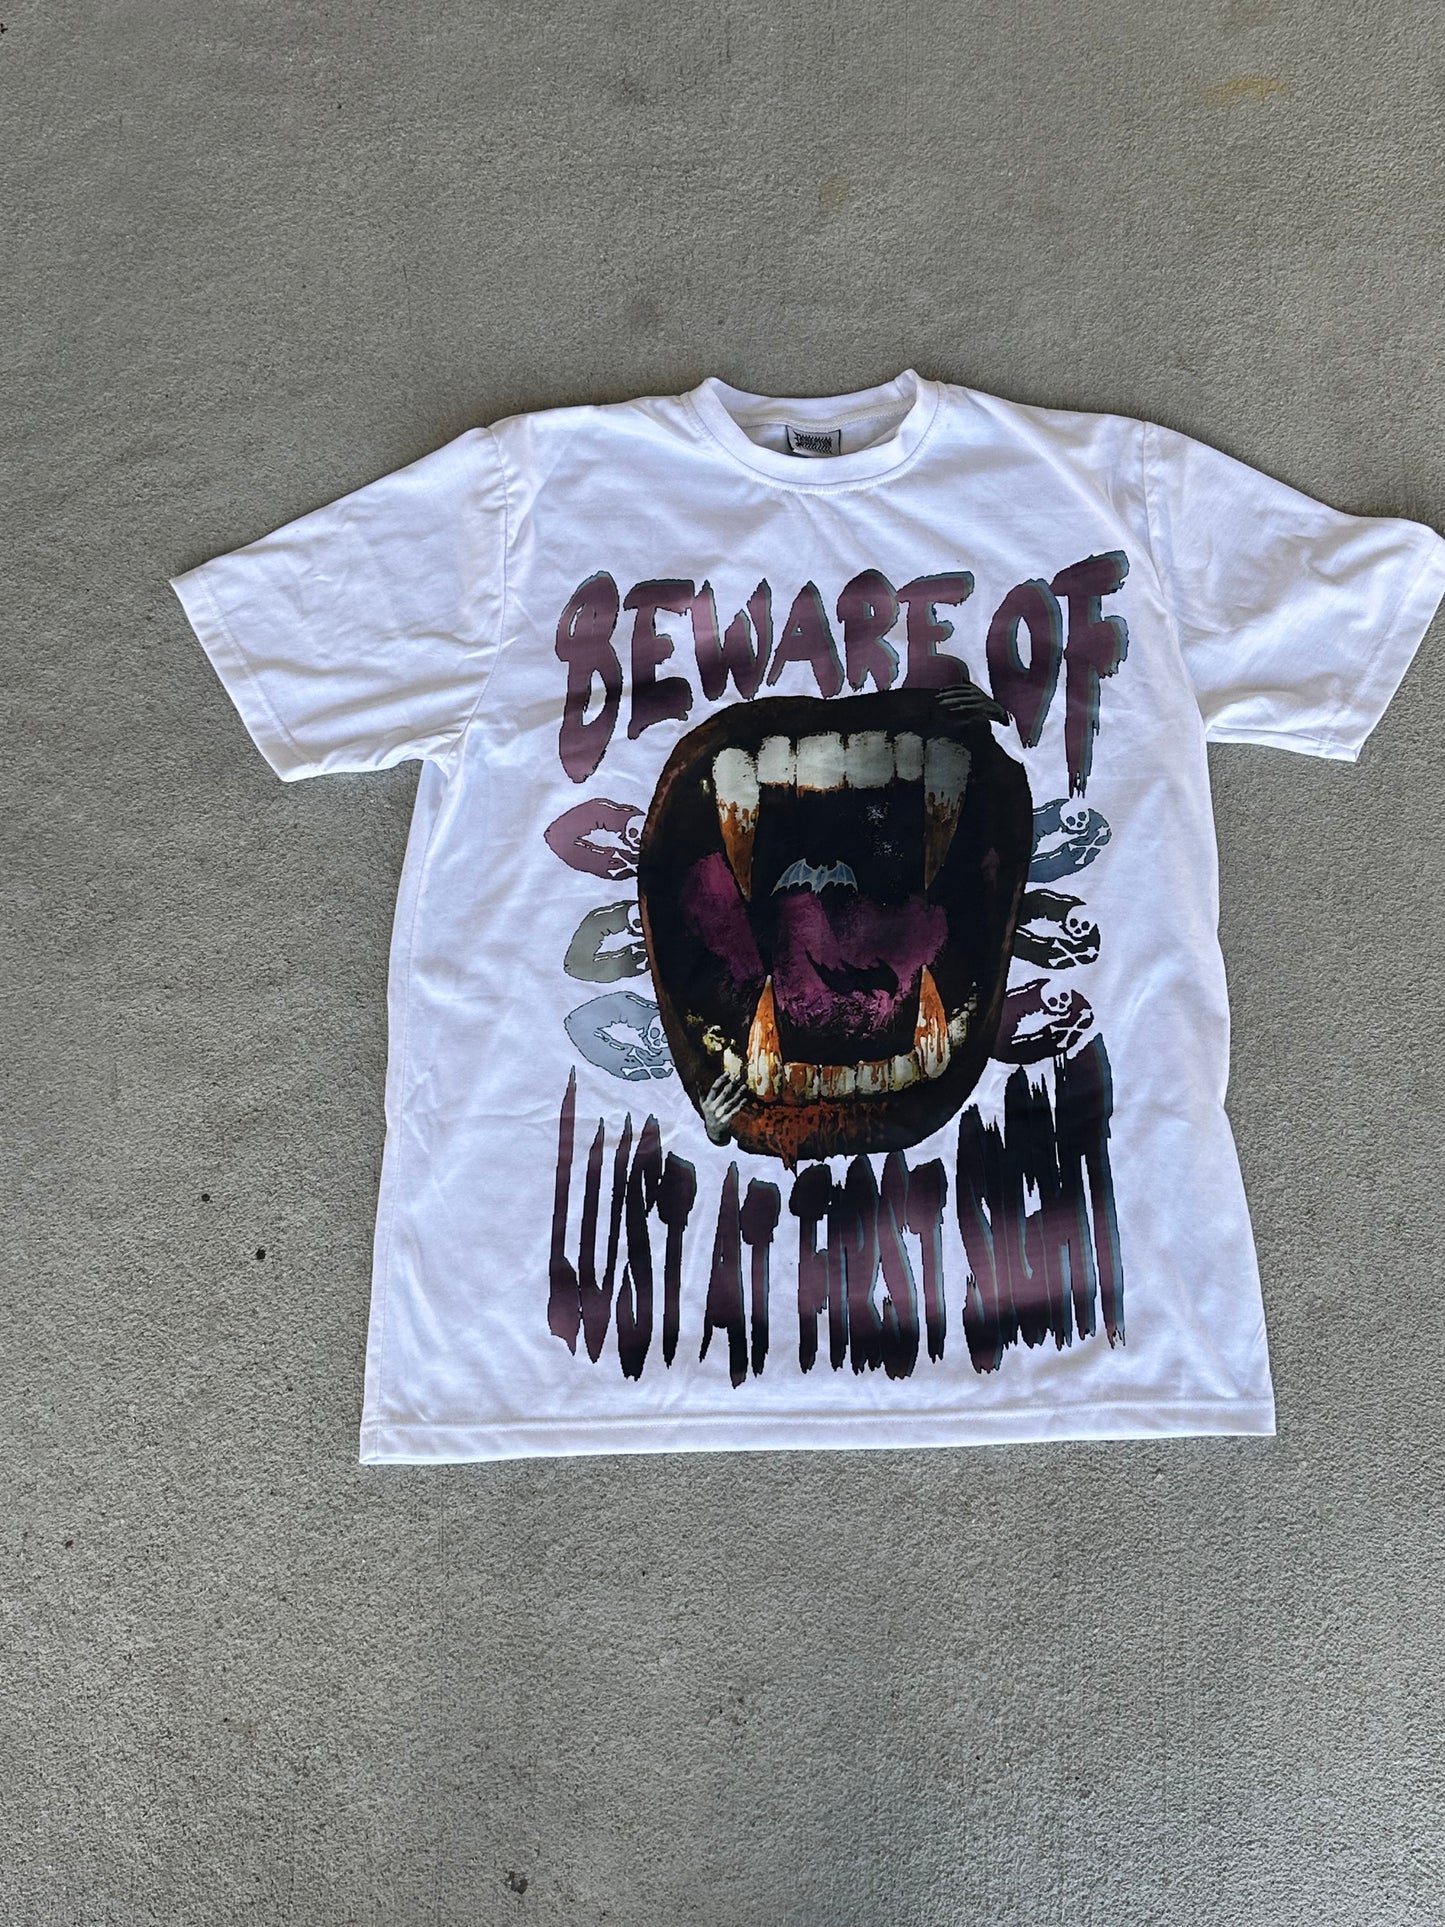 "Beware of Lust at First Sight" Tee